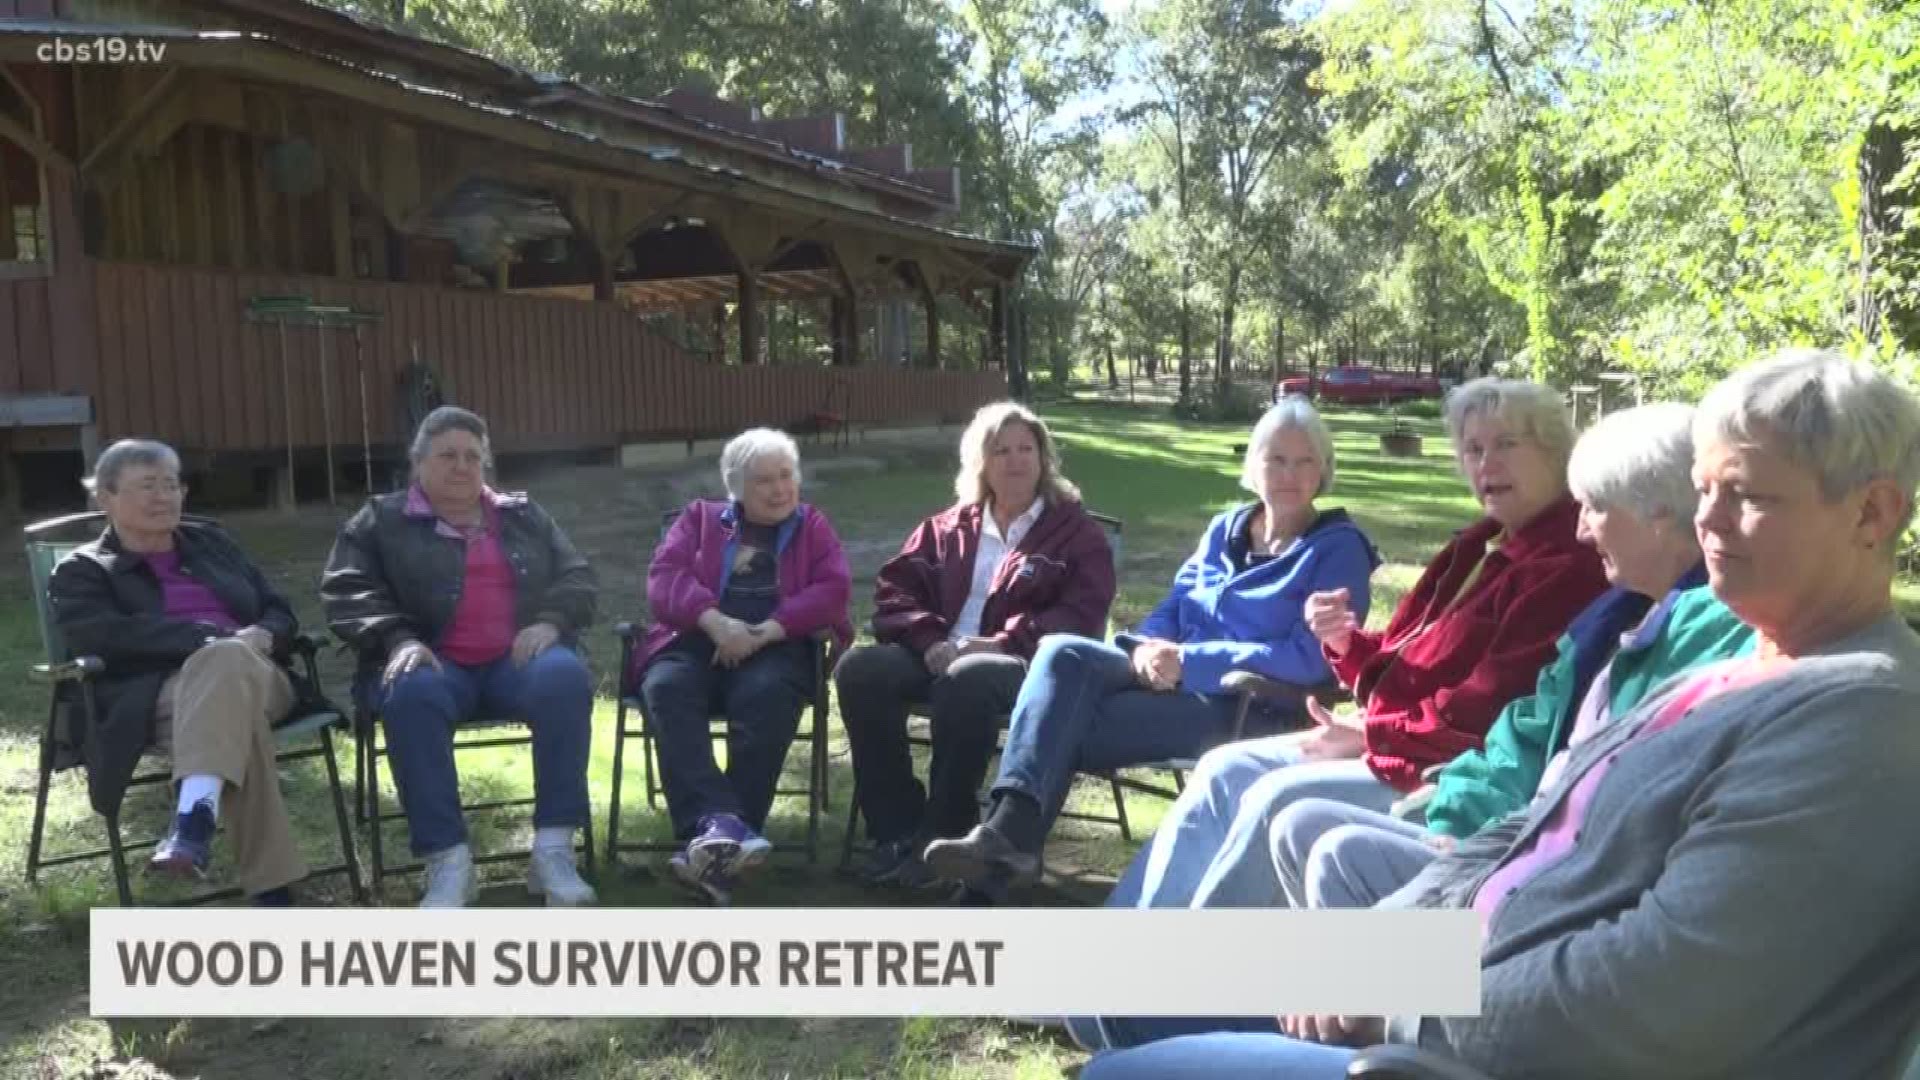 Breast Cancer survivors from across East Texas gathered at Wood Haven's retreat to share experiences of their journeys. Lexie Hudson explains.